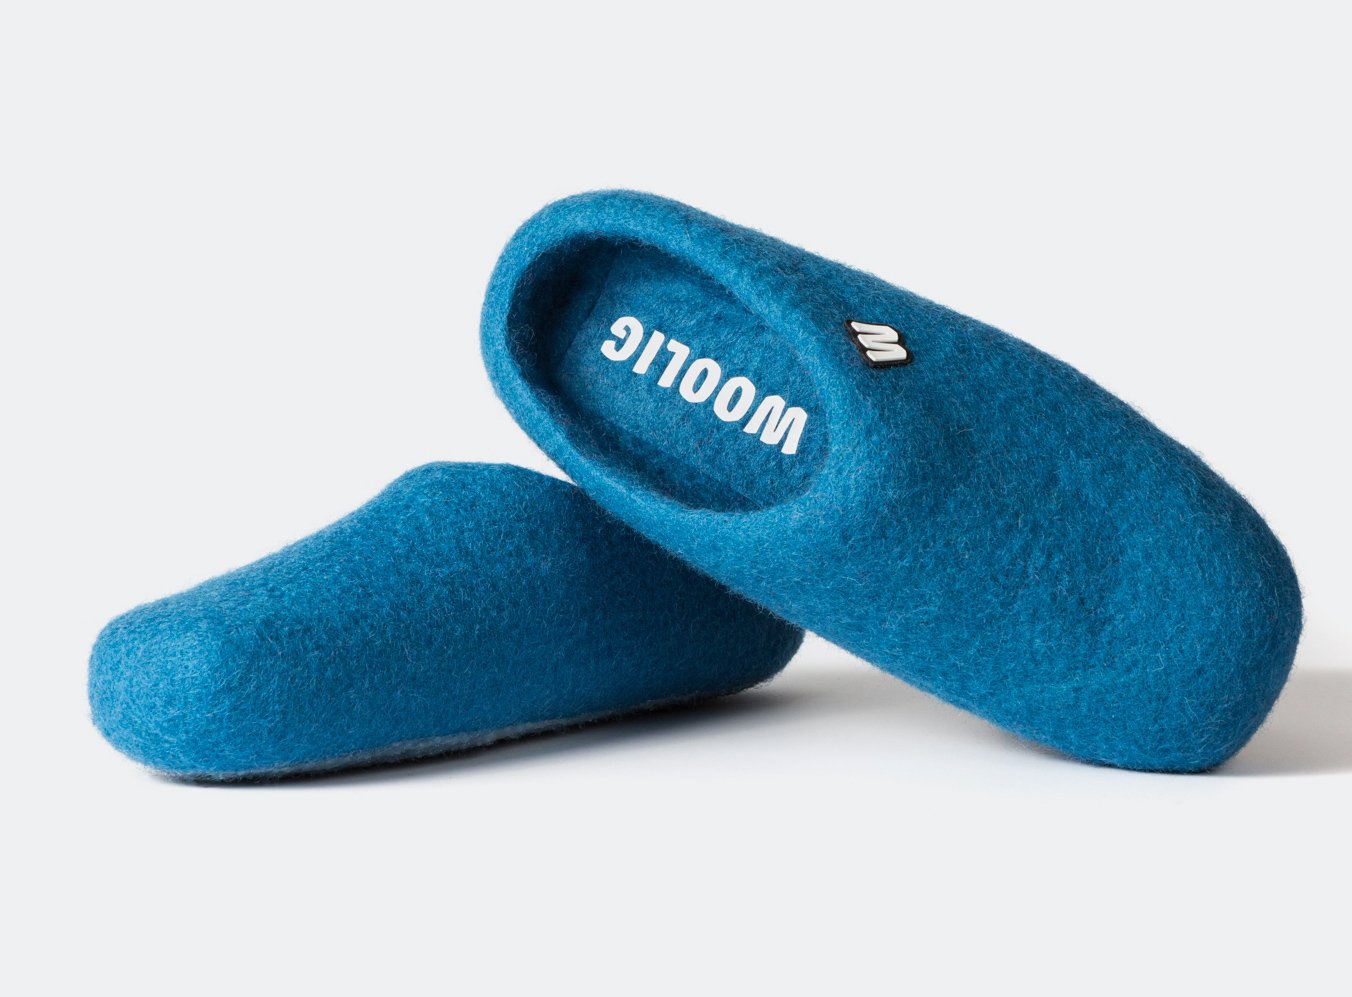 Slippers - Sapphire Blue Wool Slippers